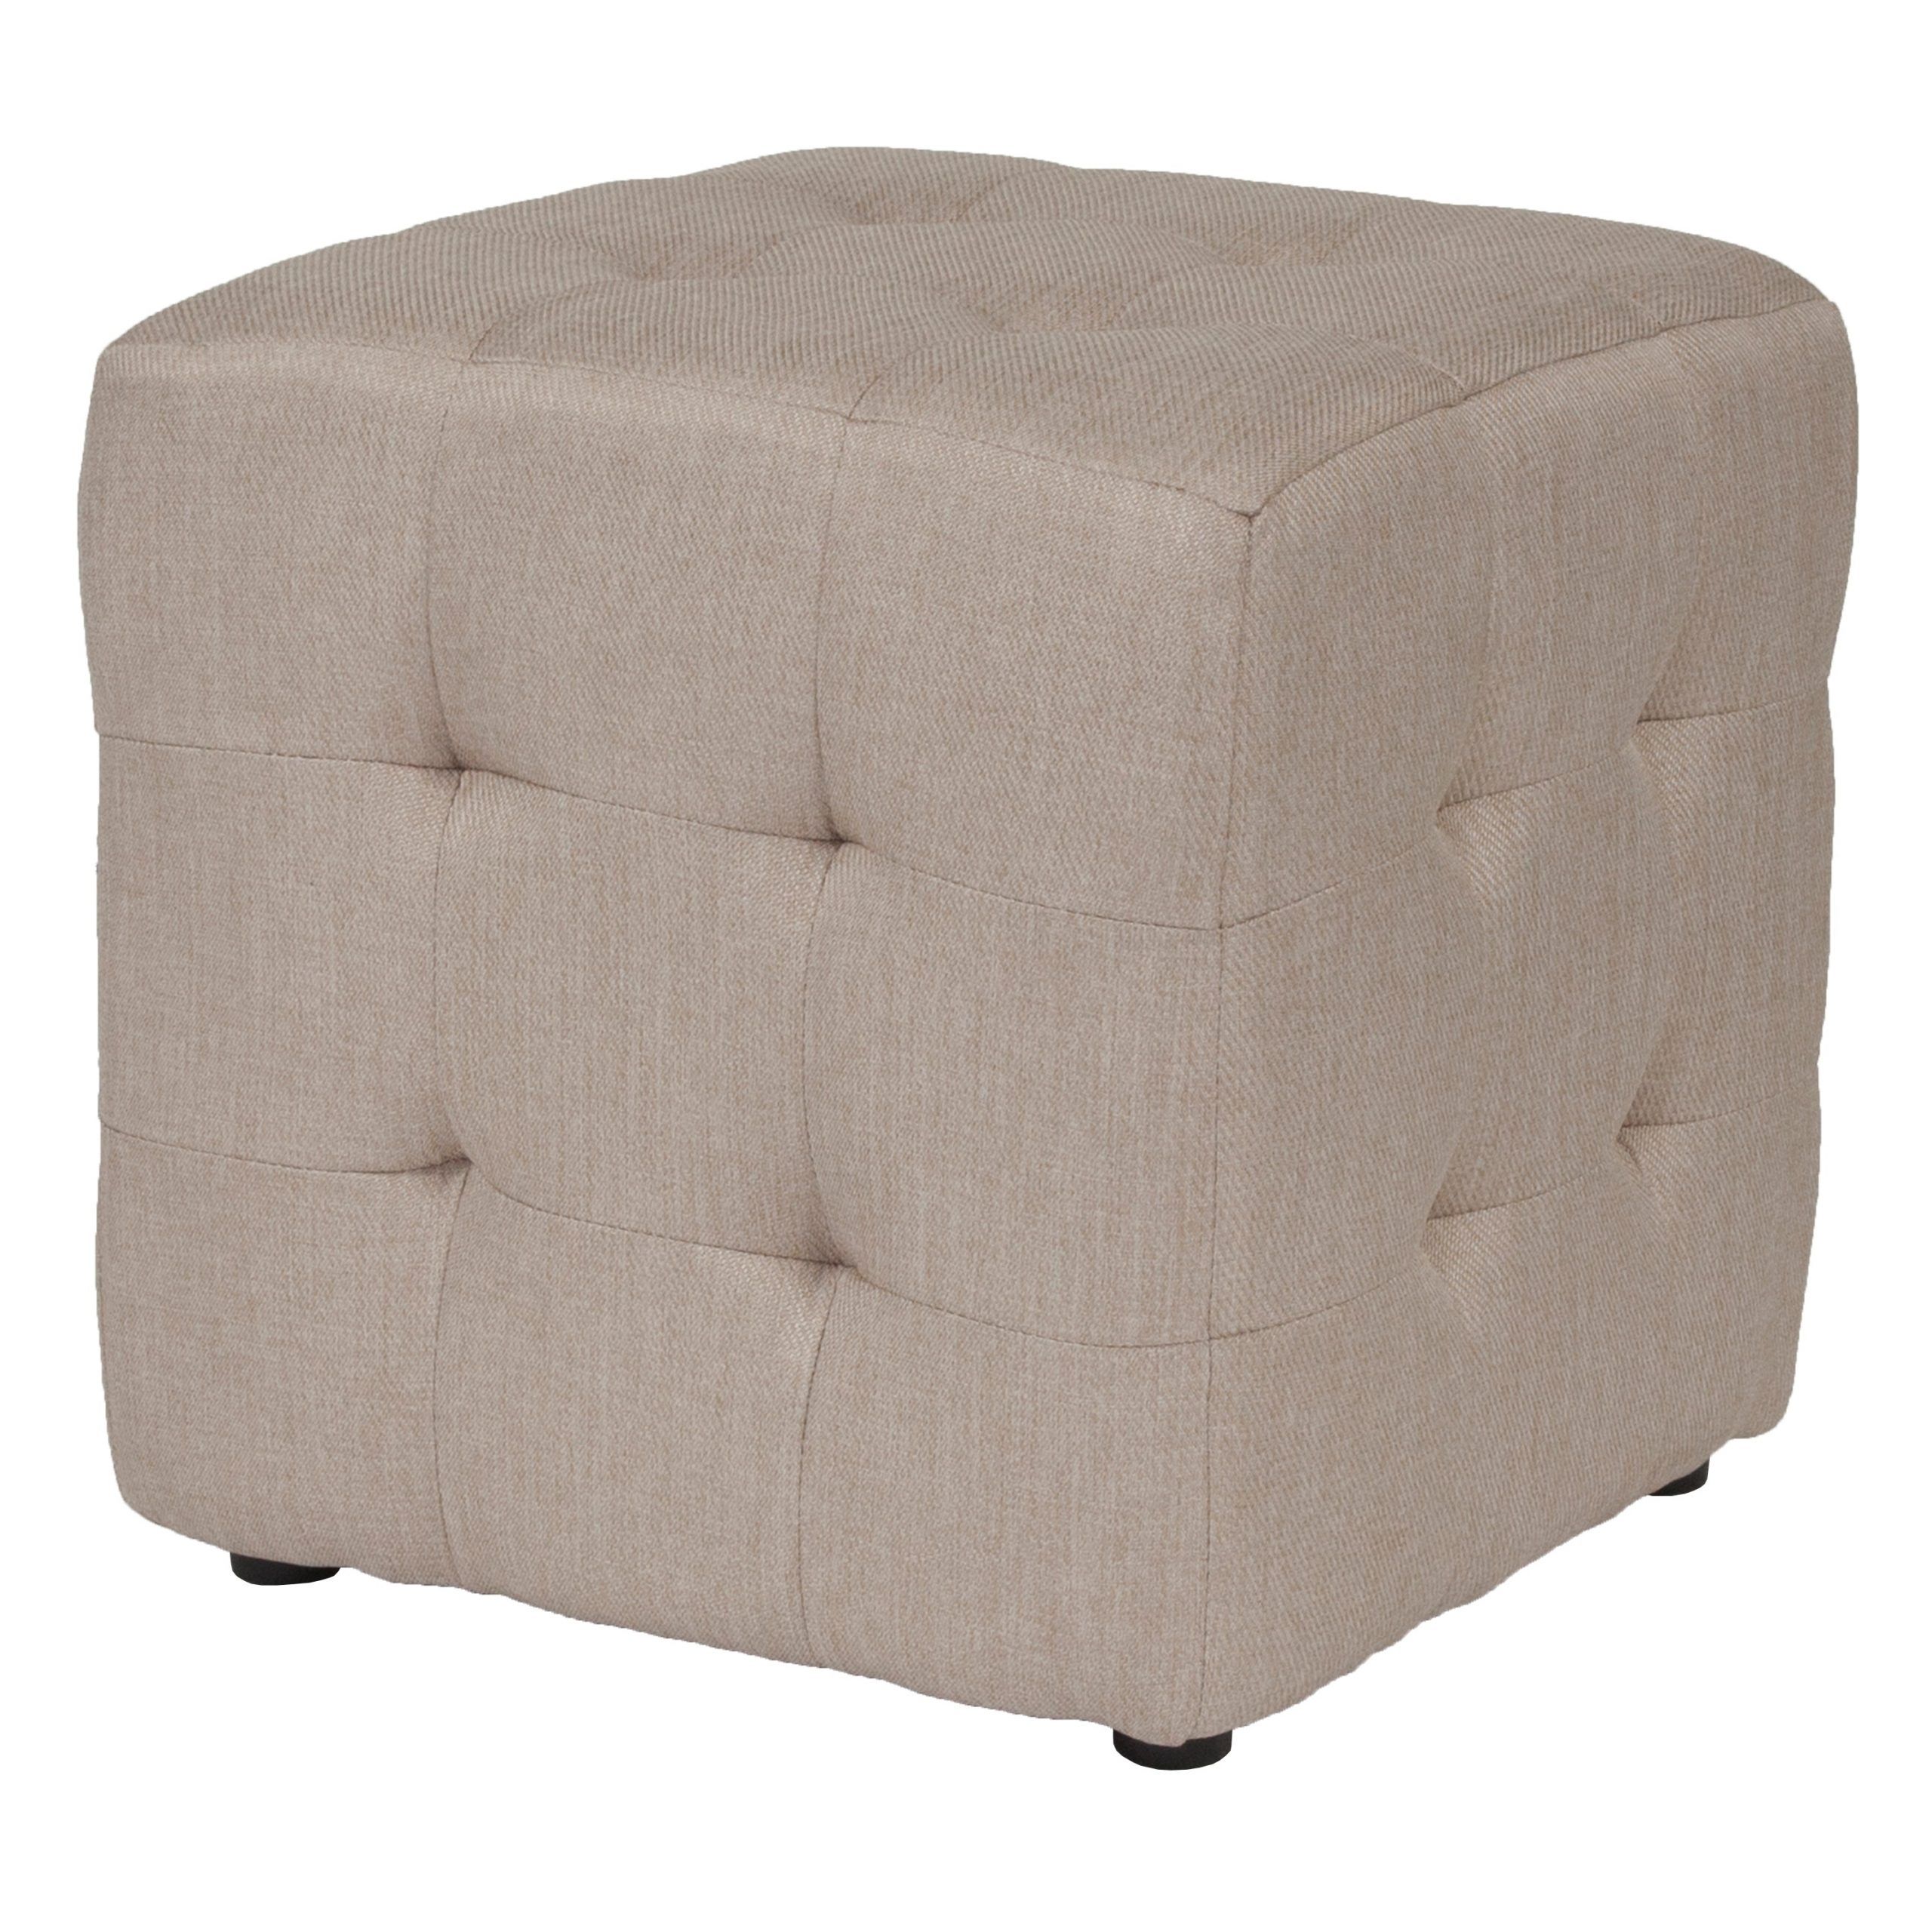 Bsd National Supplies Ogden Beige Fabric Tufted Upholstered Cube Throughout Current Gray Fabric Tufted Oval Ottomans (View 10 of 10)